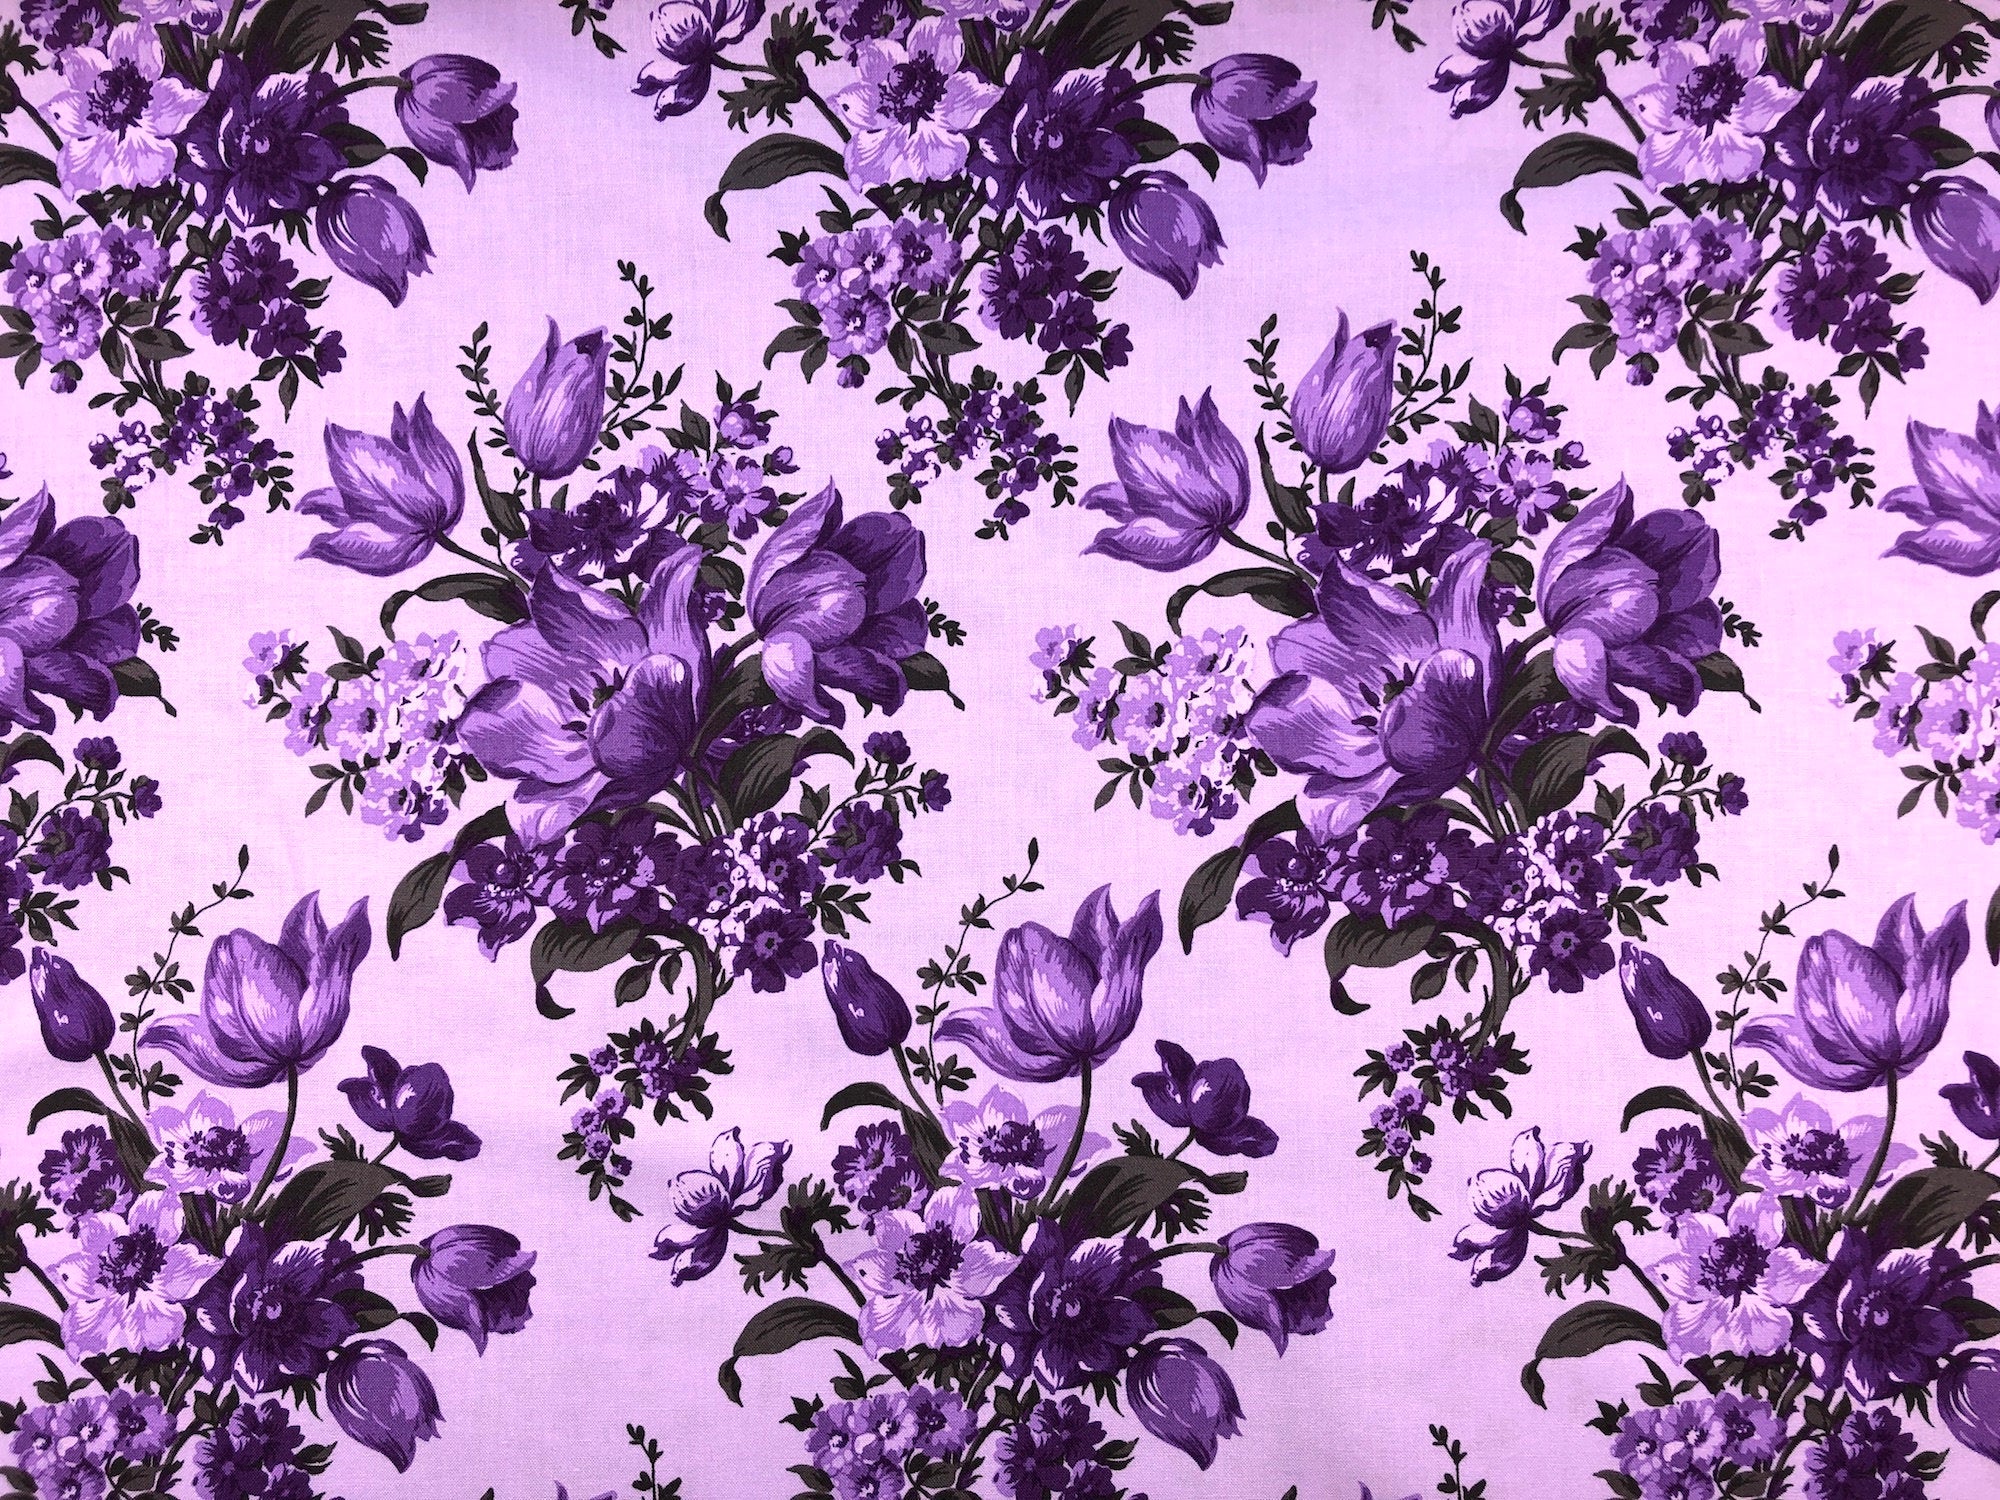 This fabric is a part of the Elegant Blooms collection and has purple and lavender flowers on a lavender background